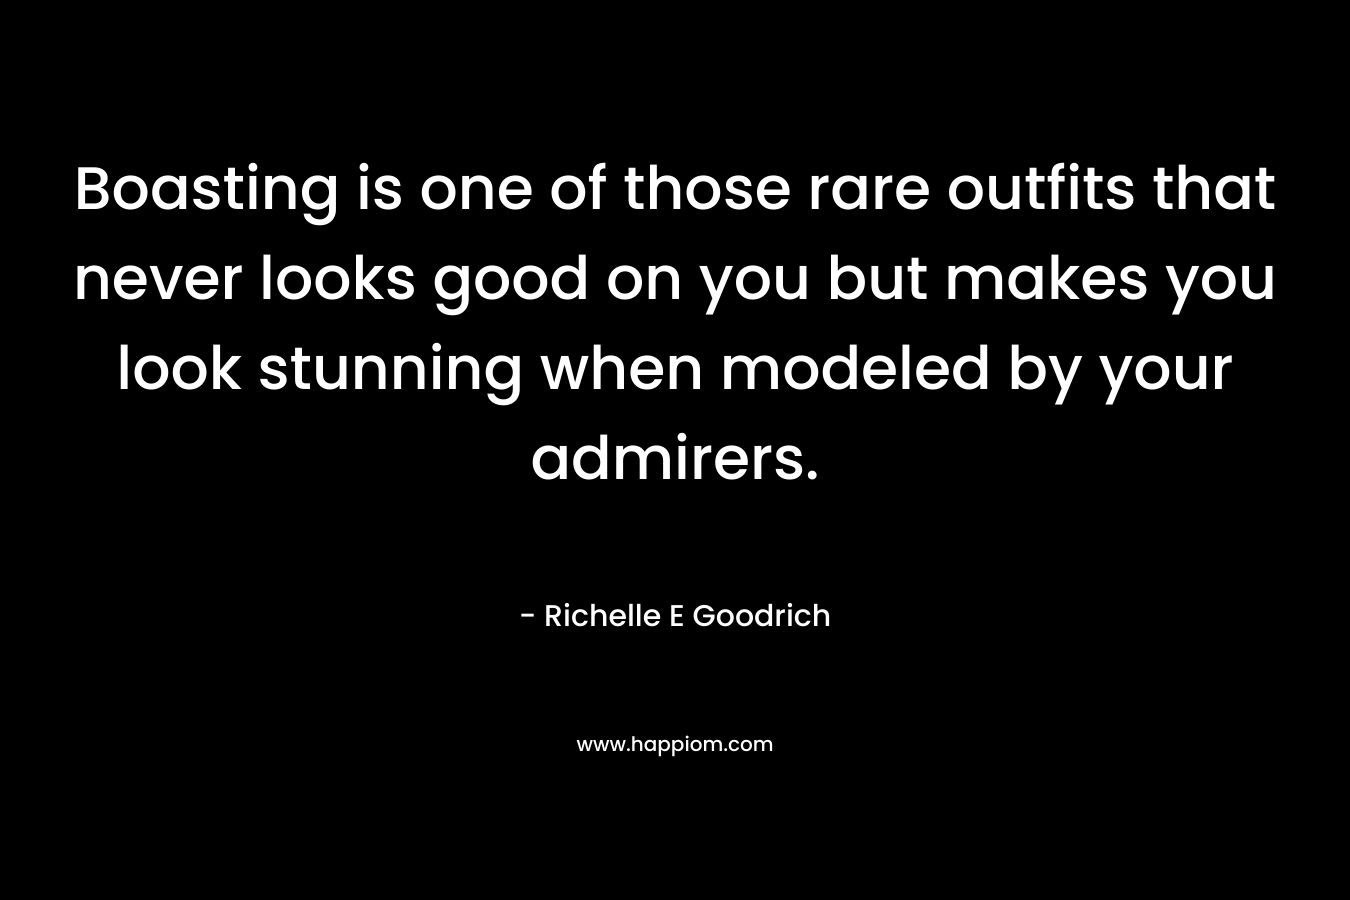 Boasting is one of those rare outfits that never looks good on you but makes you look stunning when modeled by your admirers. – Richelle E Goodrich